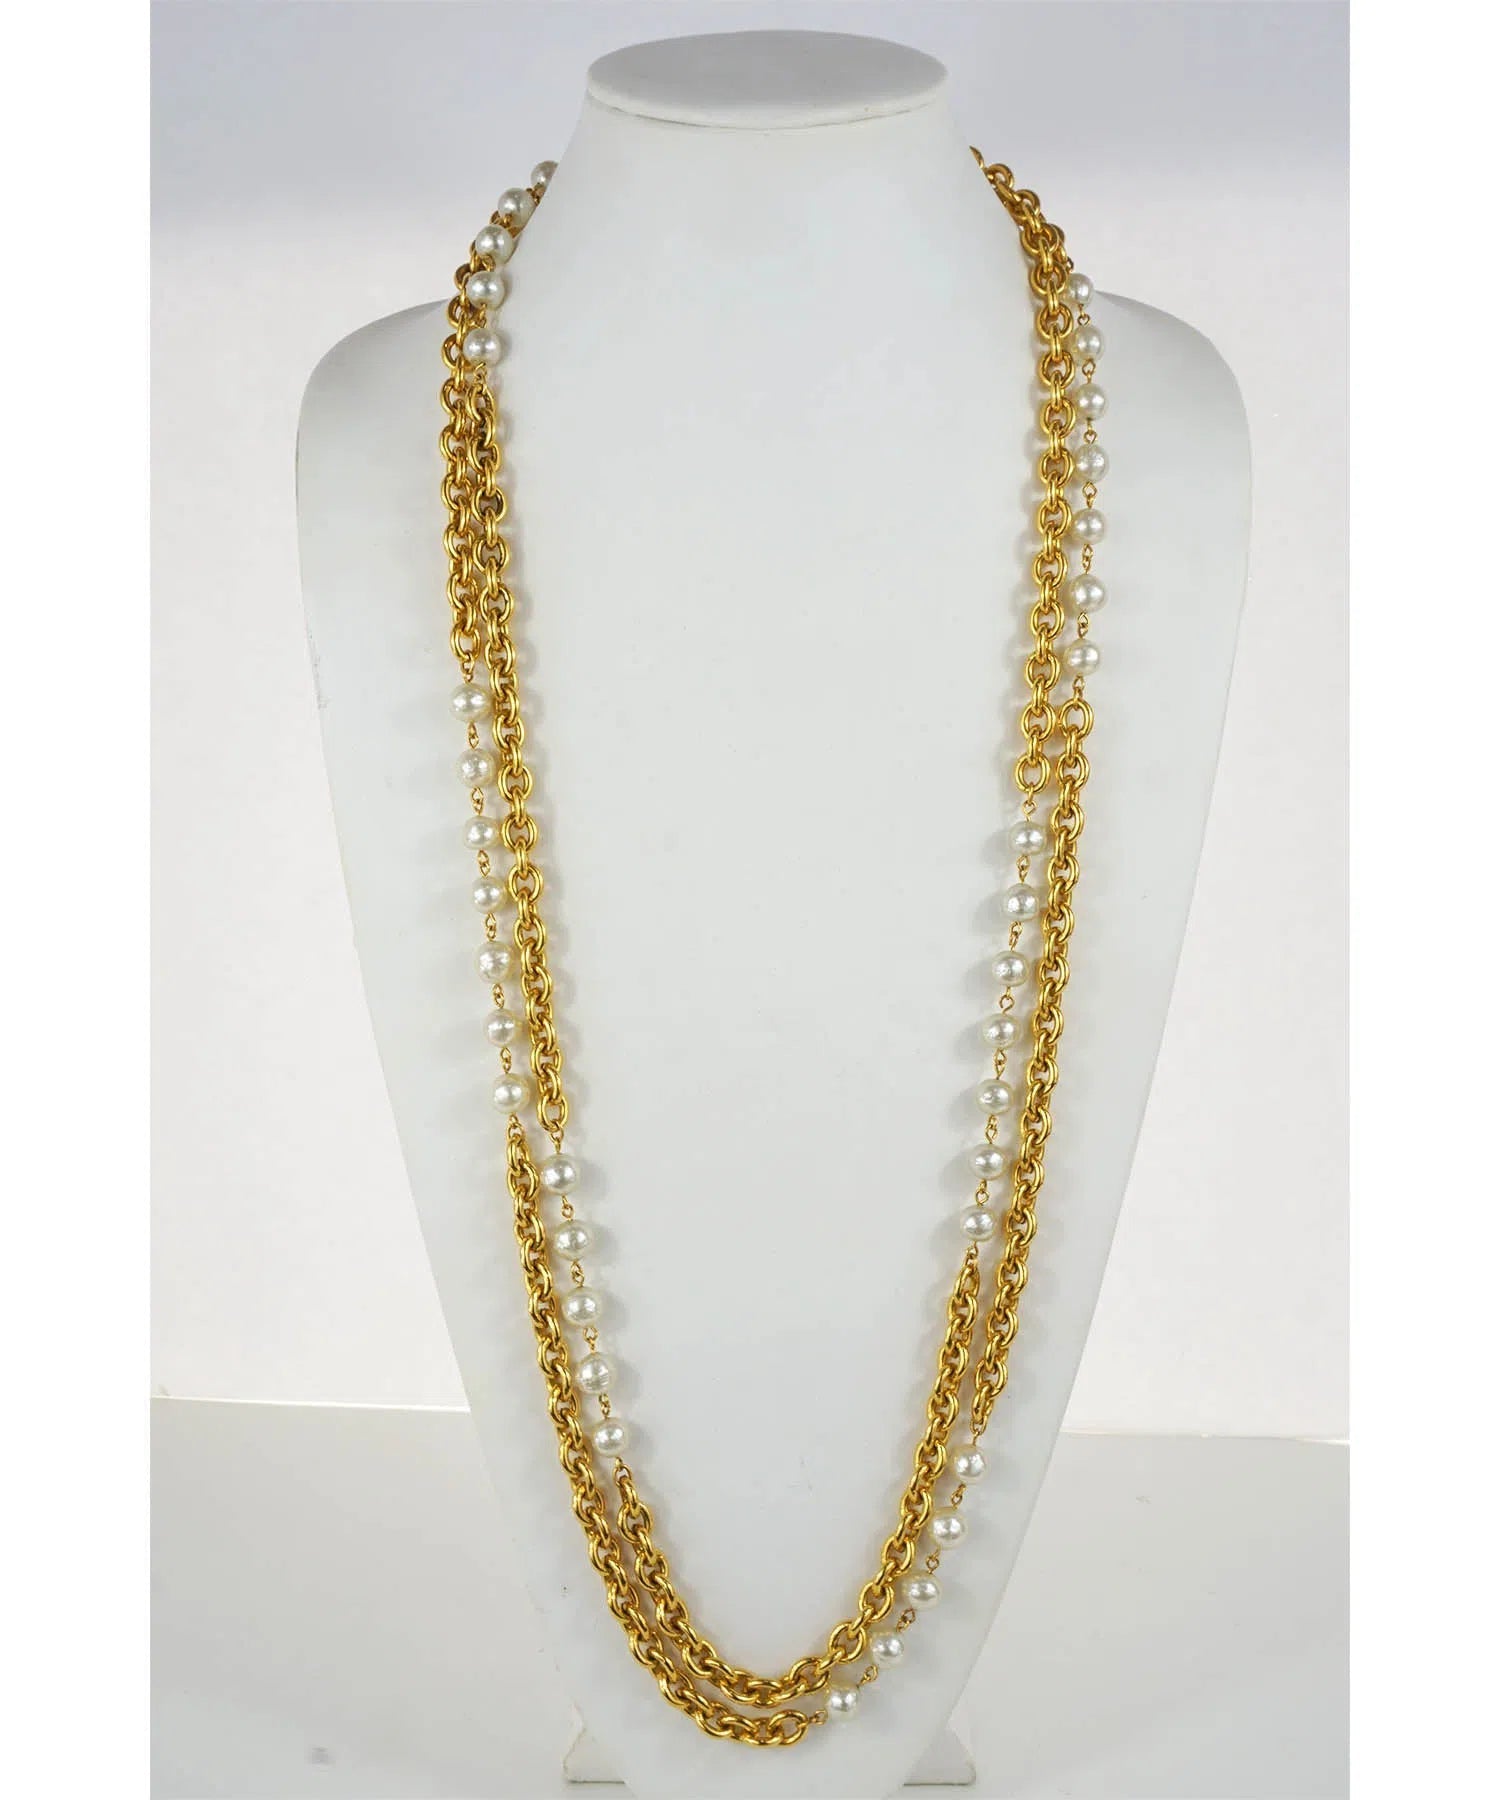 Chanel Vintage 2 Strand Pearl Chain Necklace 1990's